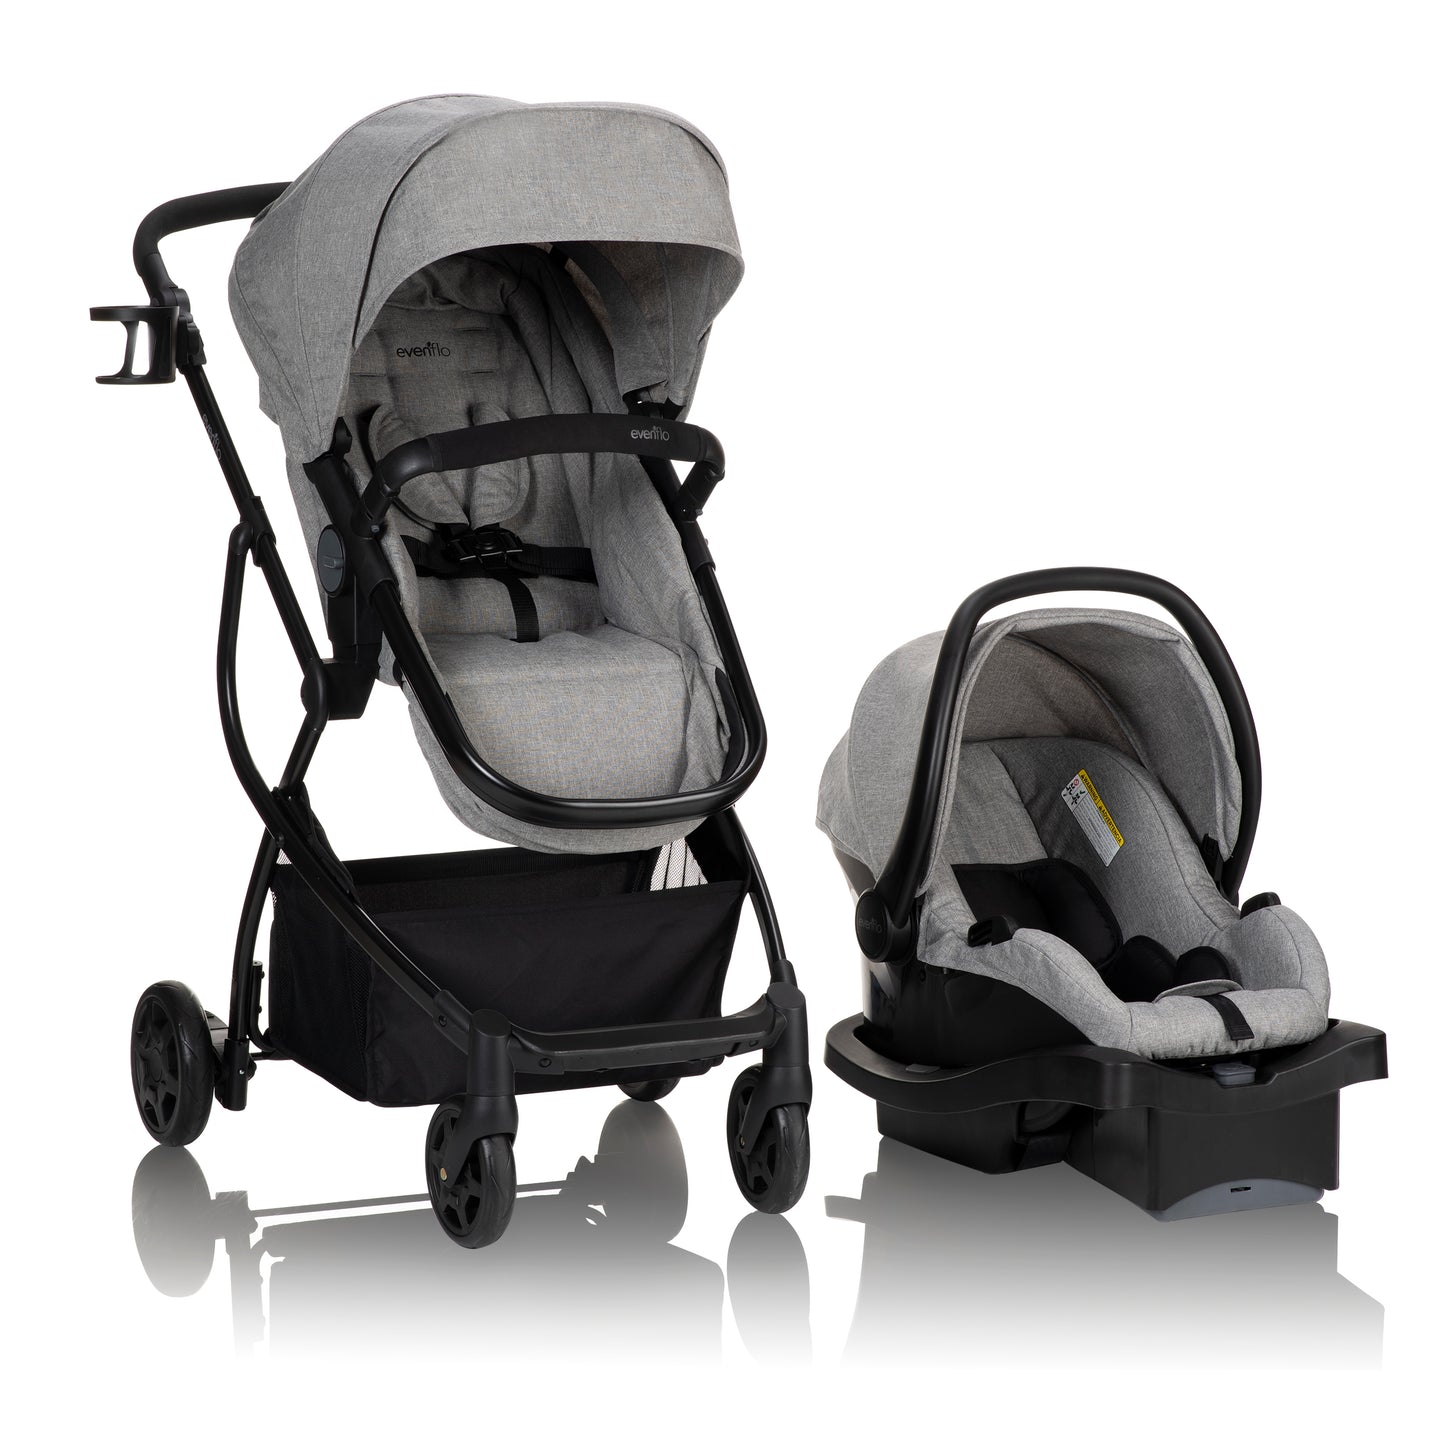 Omni Plus Modular Travel System with LiteMax Sport Rear-Facing Infant Car Seat Support